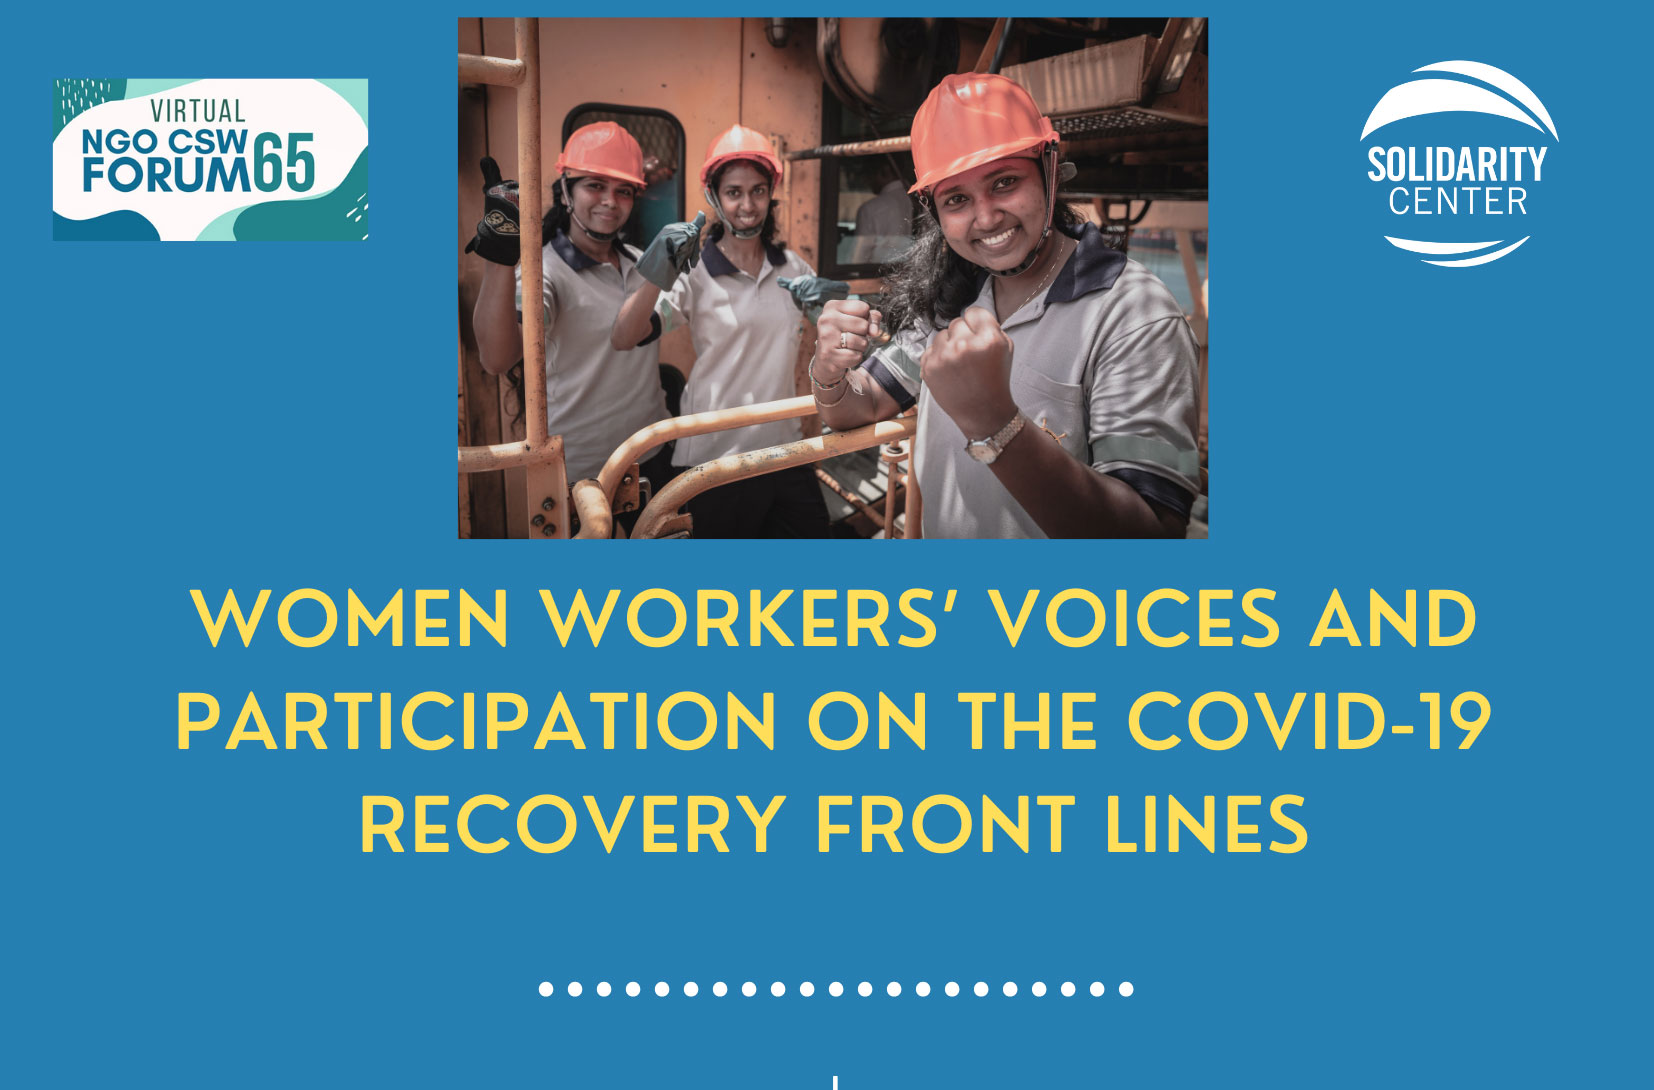 Union Women on the COVID-19 Front Lines: The Road to Recovery